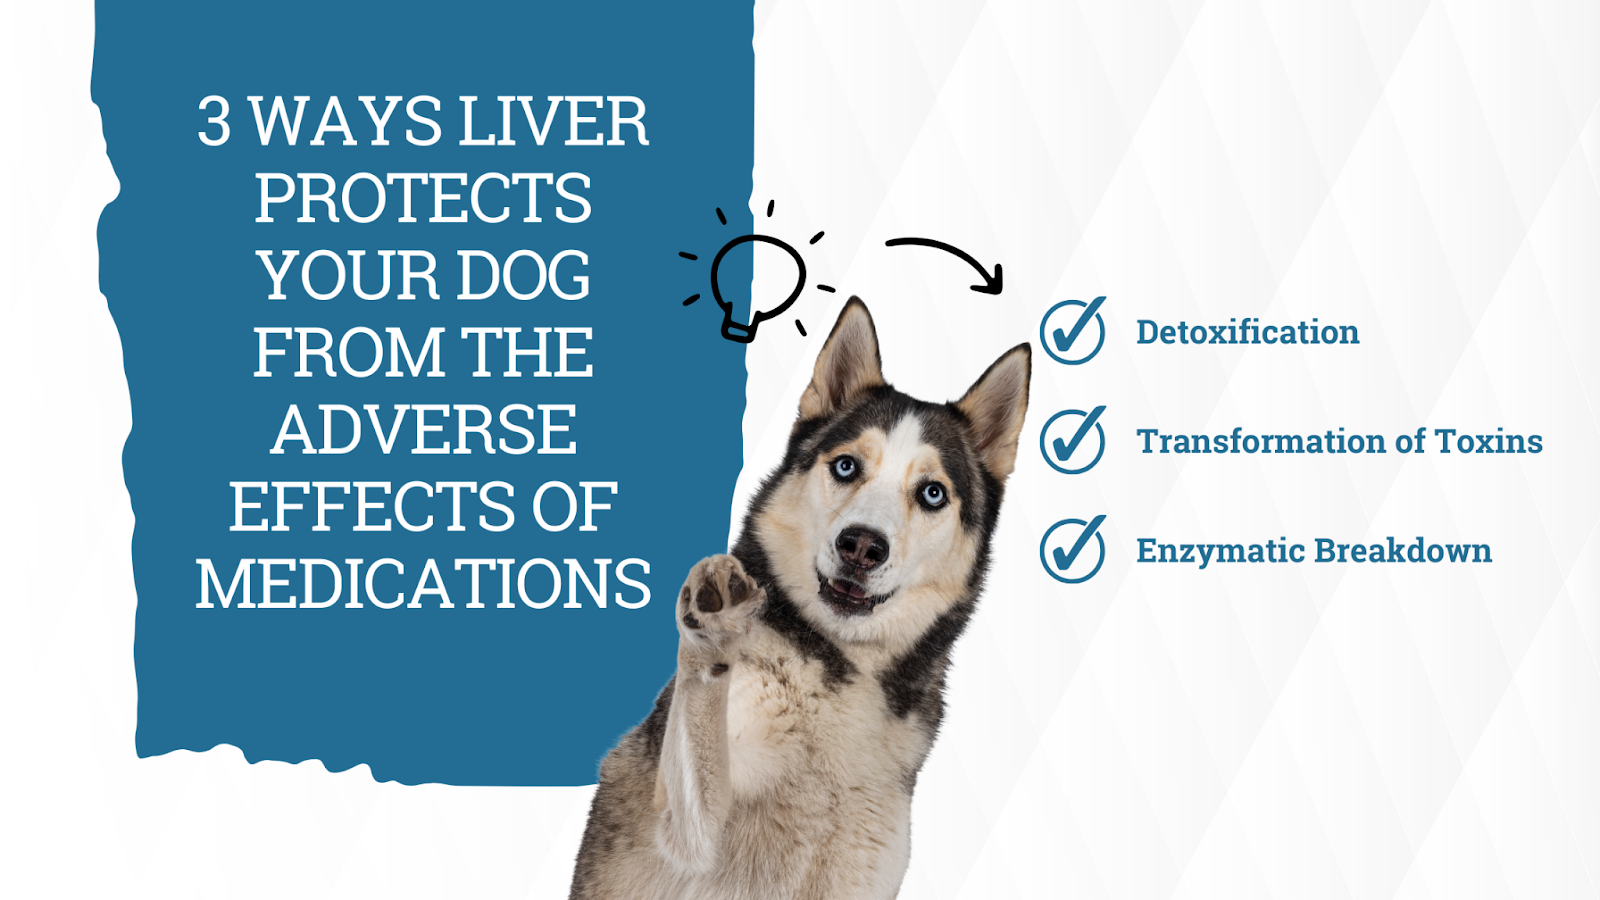 3 ways the liver protects your dog from medications